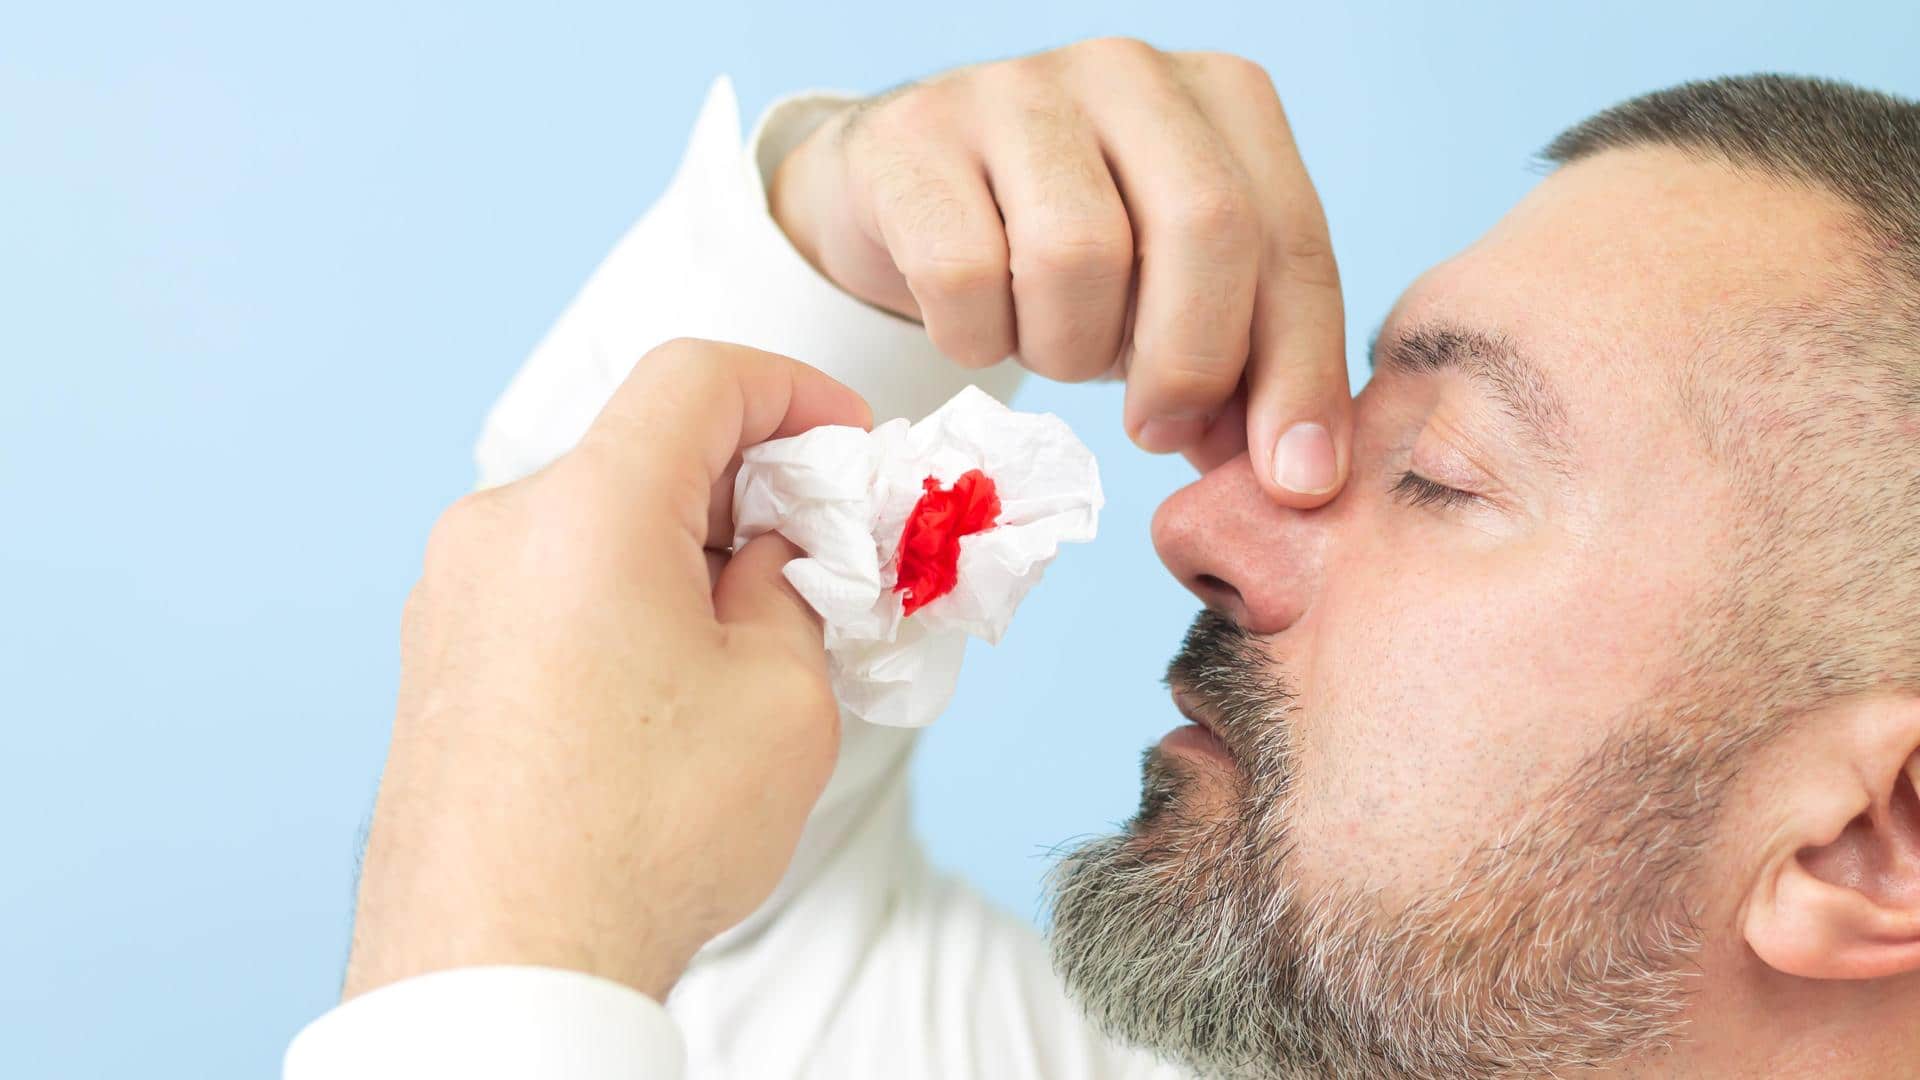 Nose bleeding in summer? These home remedies can help you